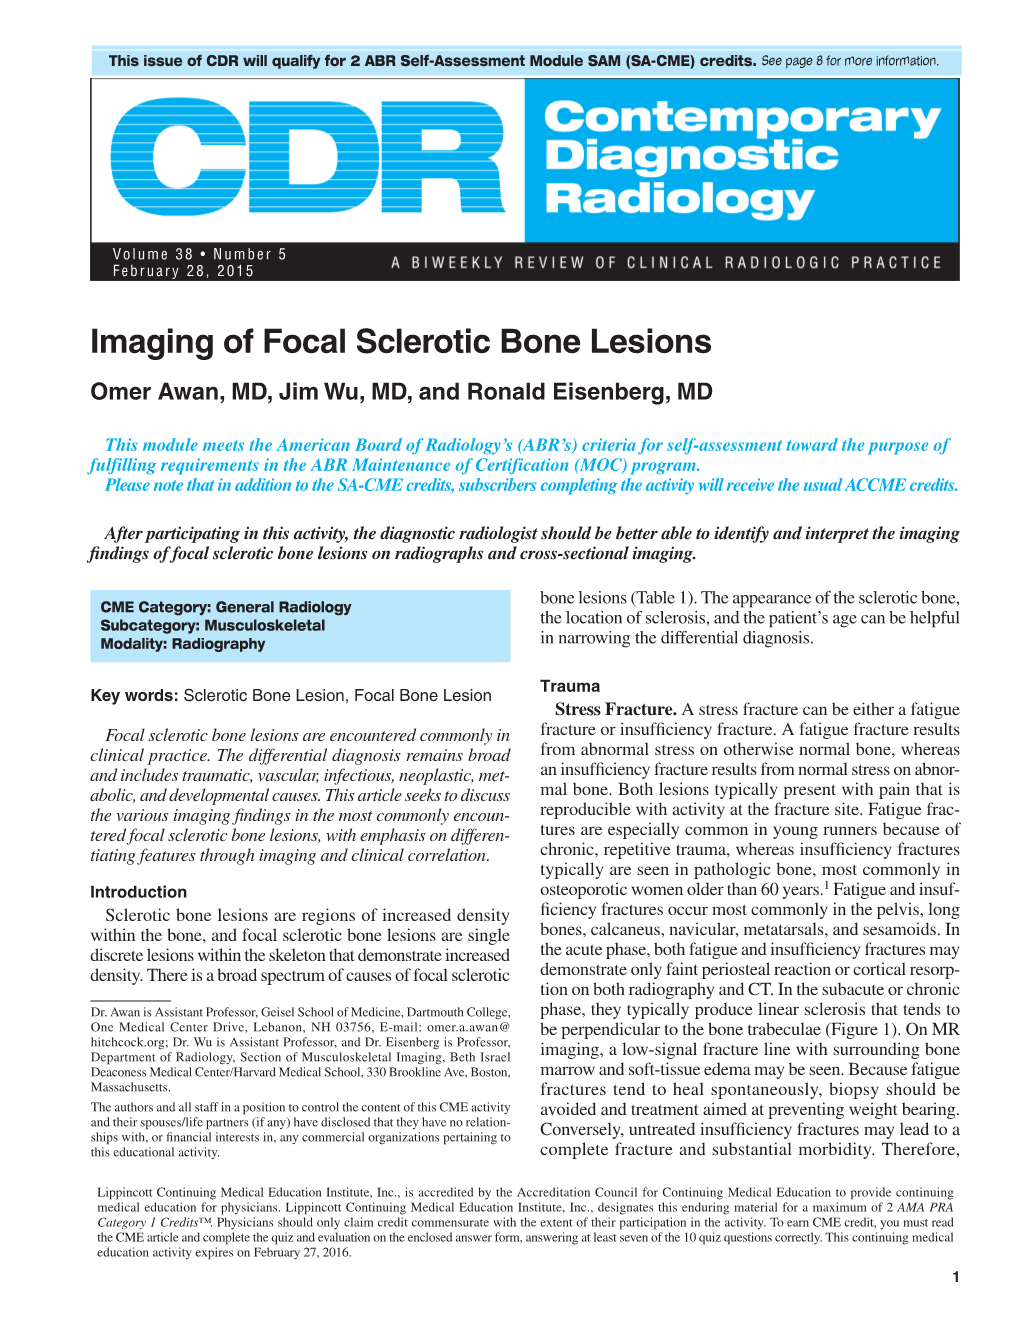 Imaging of Focal Sclerotic Bone Lesions Omer Awan, MD, Jim Wu, MD, and Ronald Eisenberg, MD